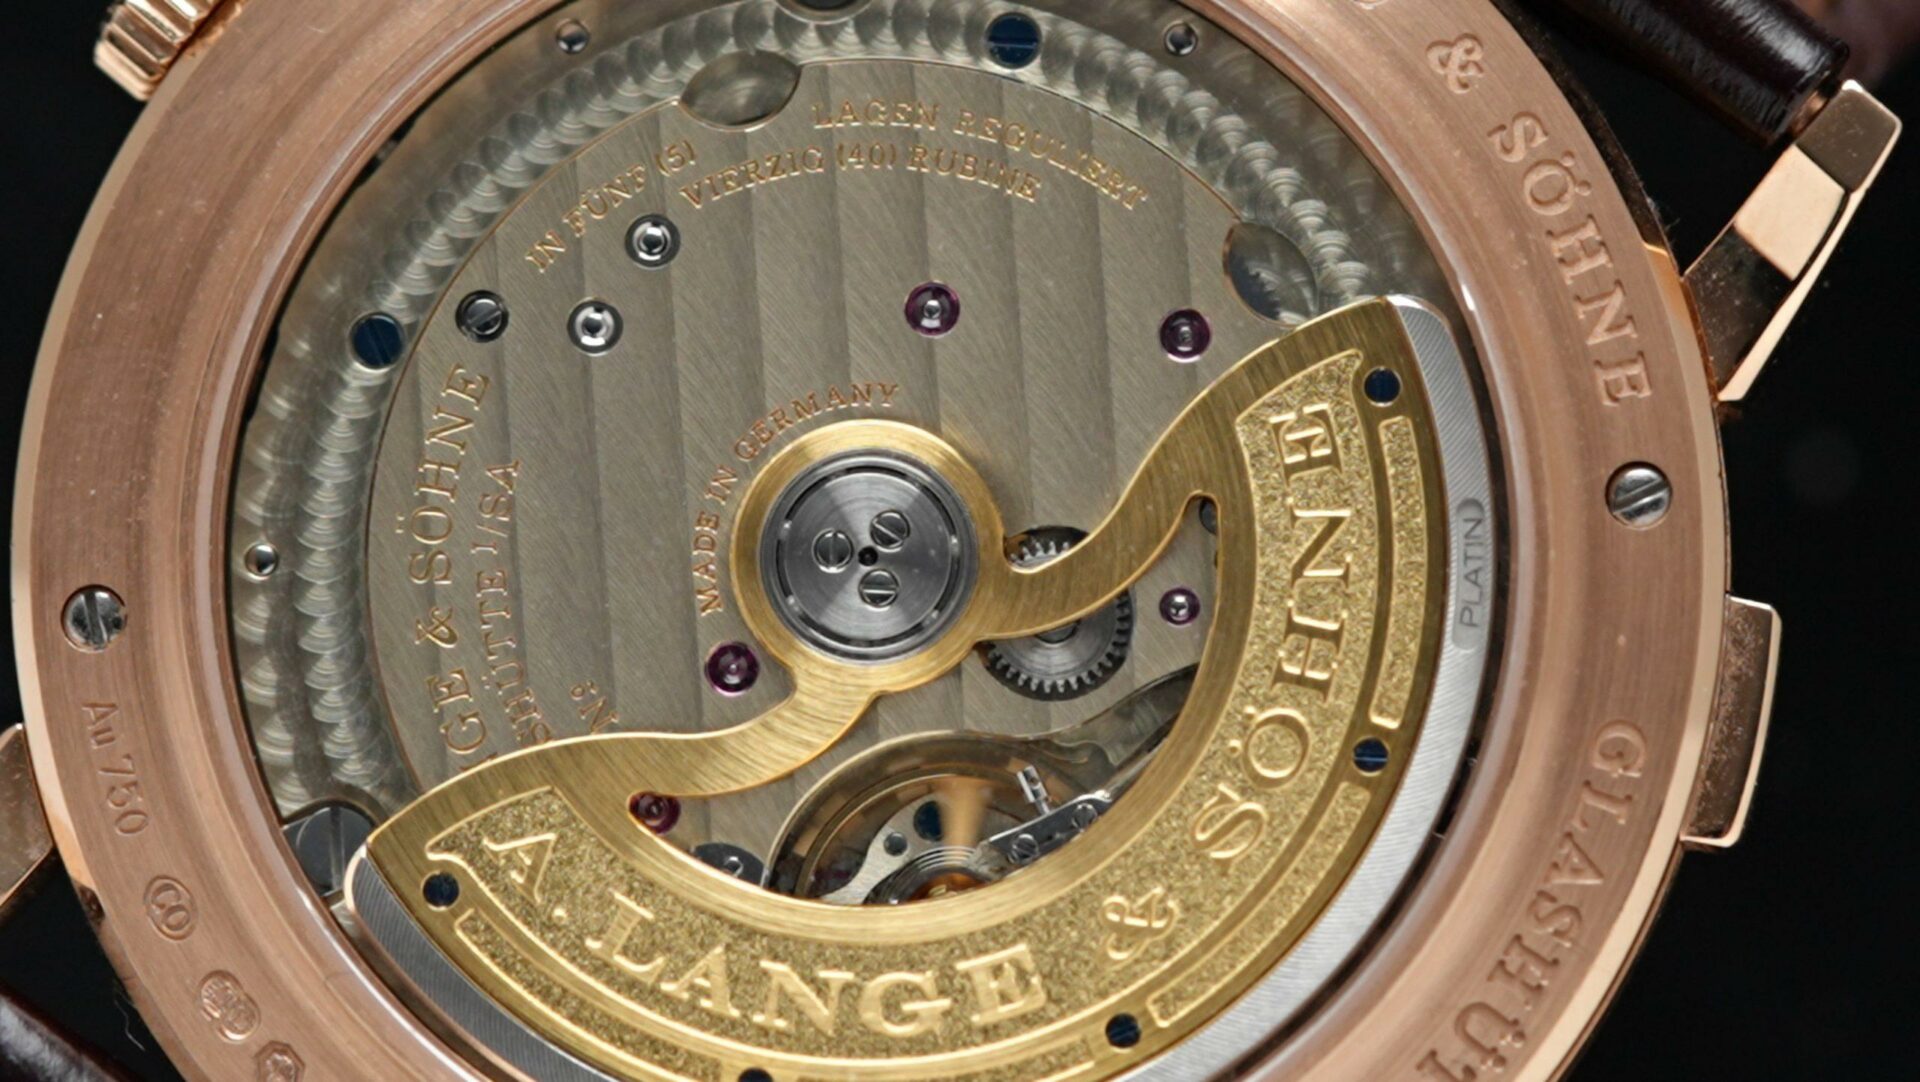 Back side of the A. Lange & Söhne Saxonia Moon Phase Rose Gold.